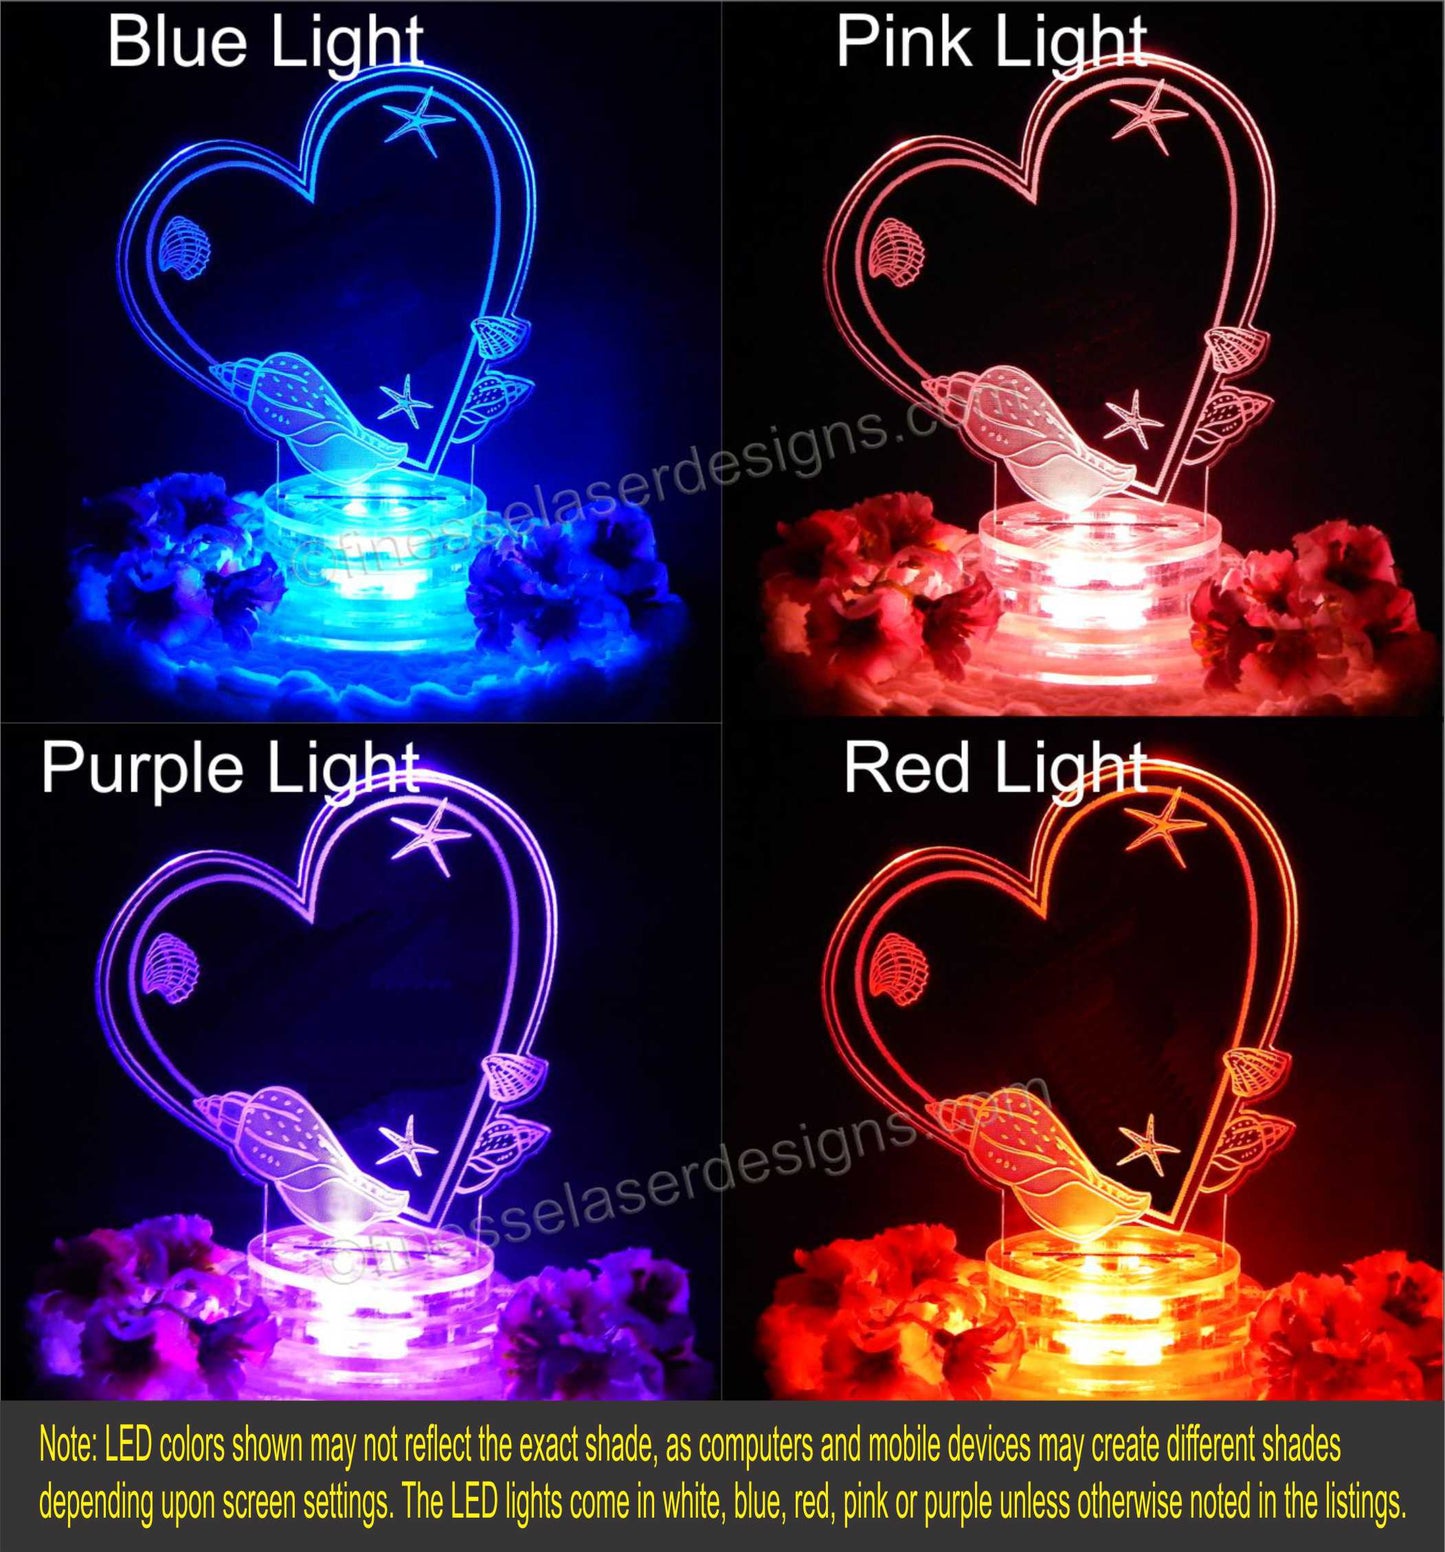 colored light views of a heart shaped cake topper designed with seashells showing blue, pink, purple and red lighted views